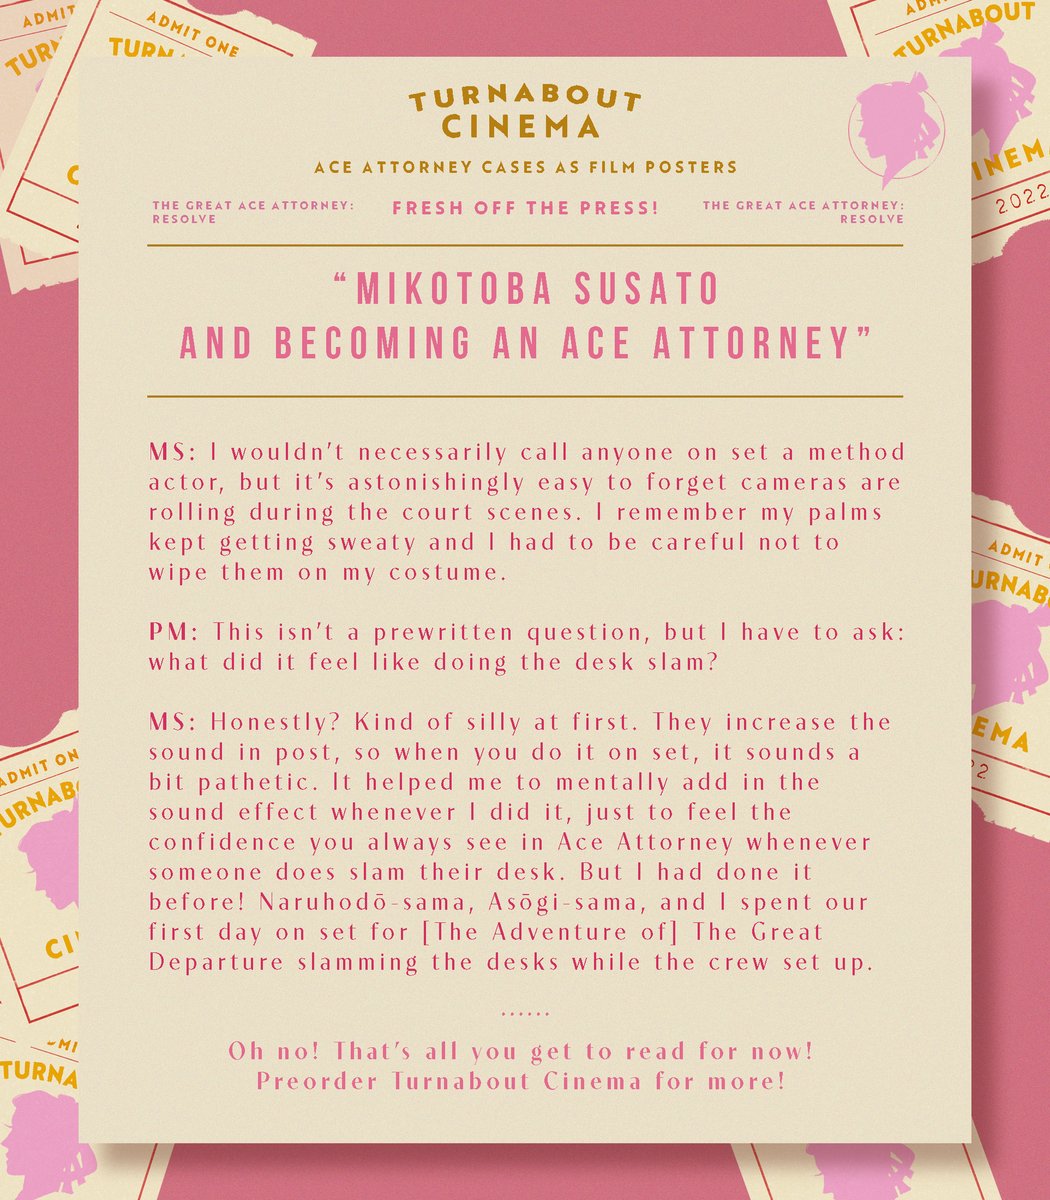 EXCLUSIVE INTERVIEW!! a preview of my piece for @TurnaboutCinema! honored to be a part of this project and to write about susato and her courtroom debut as a lawyer—make sure to snag a copy of this stunning project before preorders close!